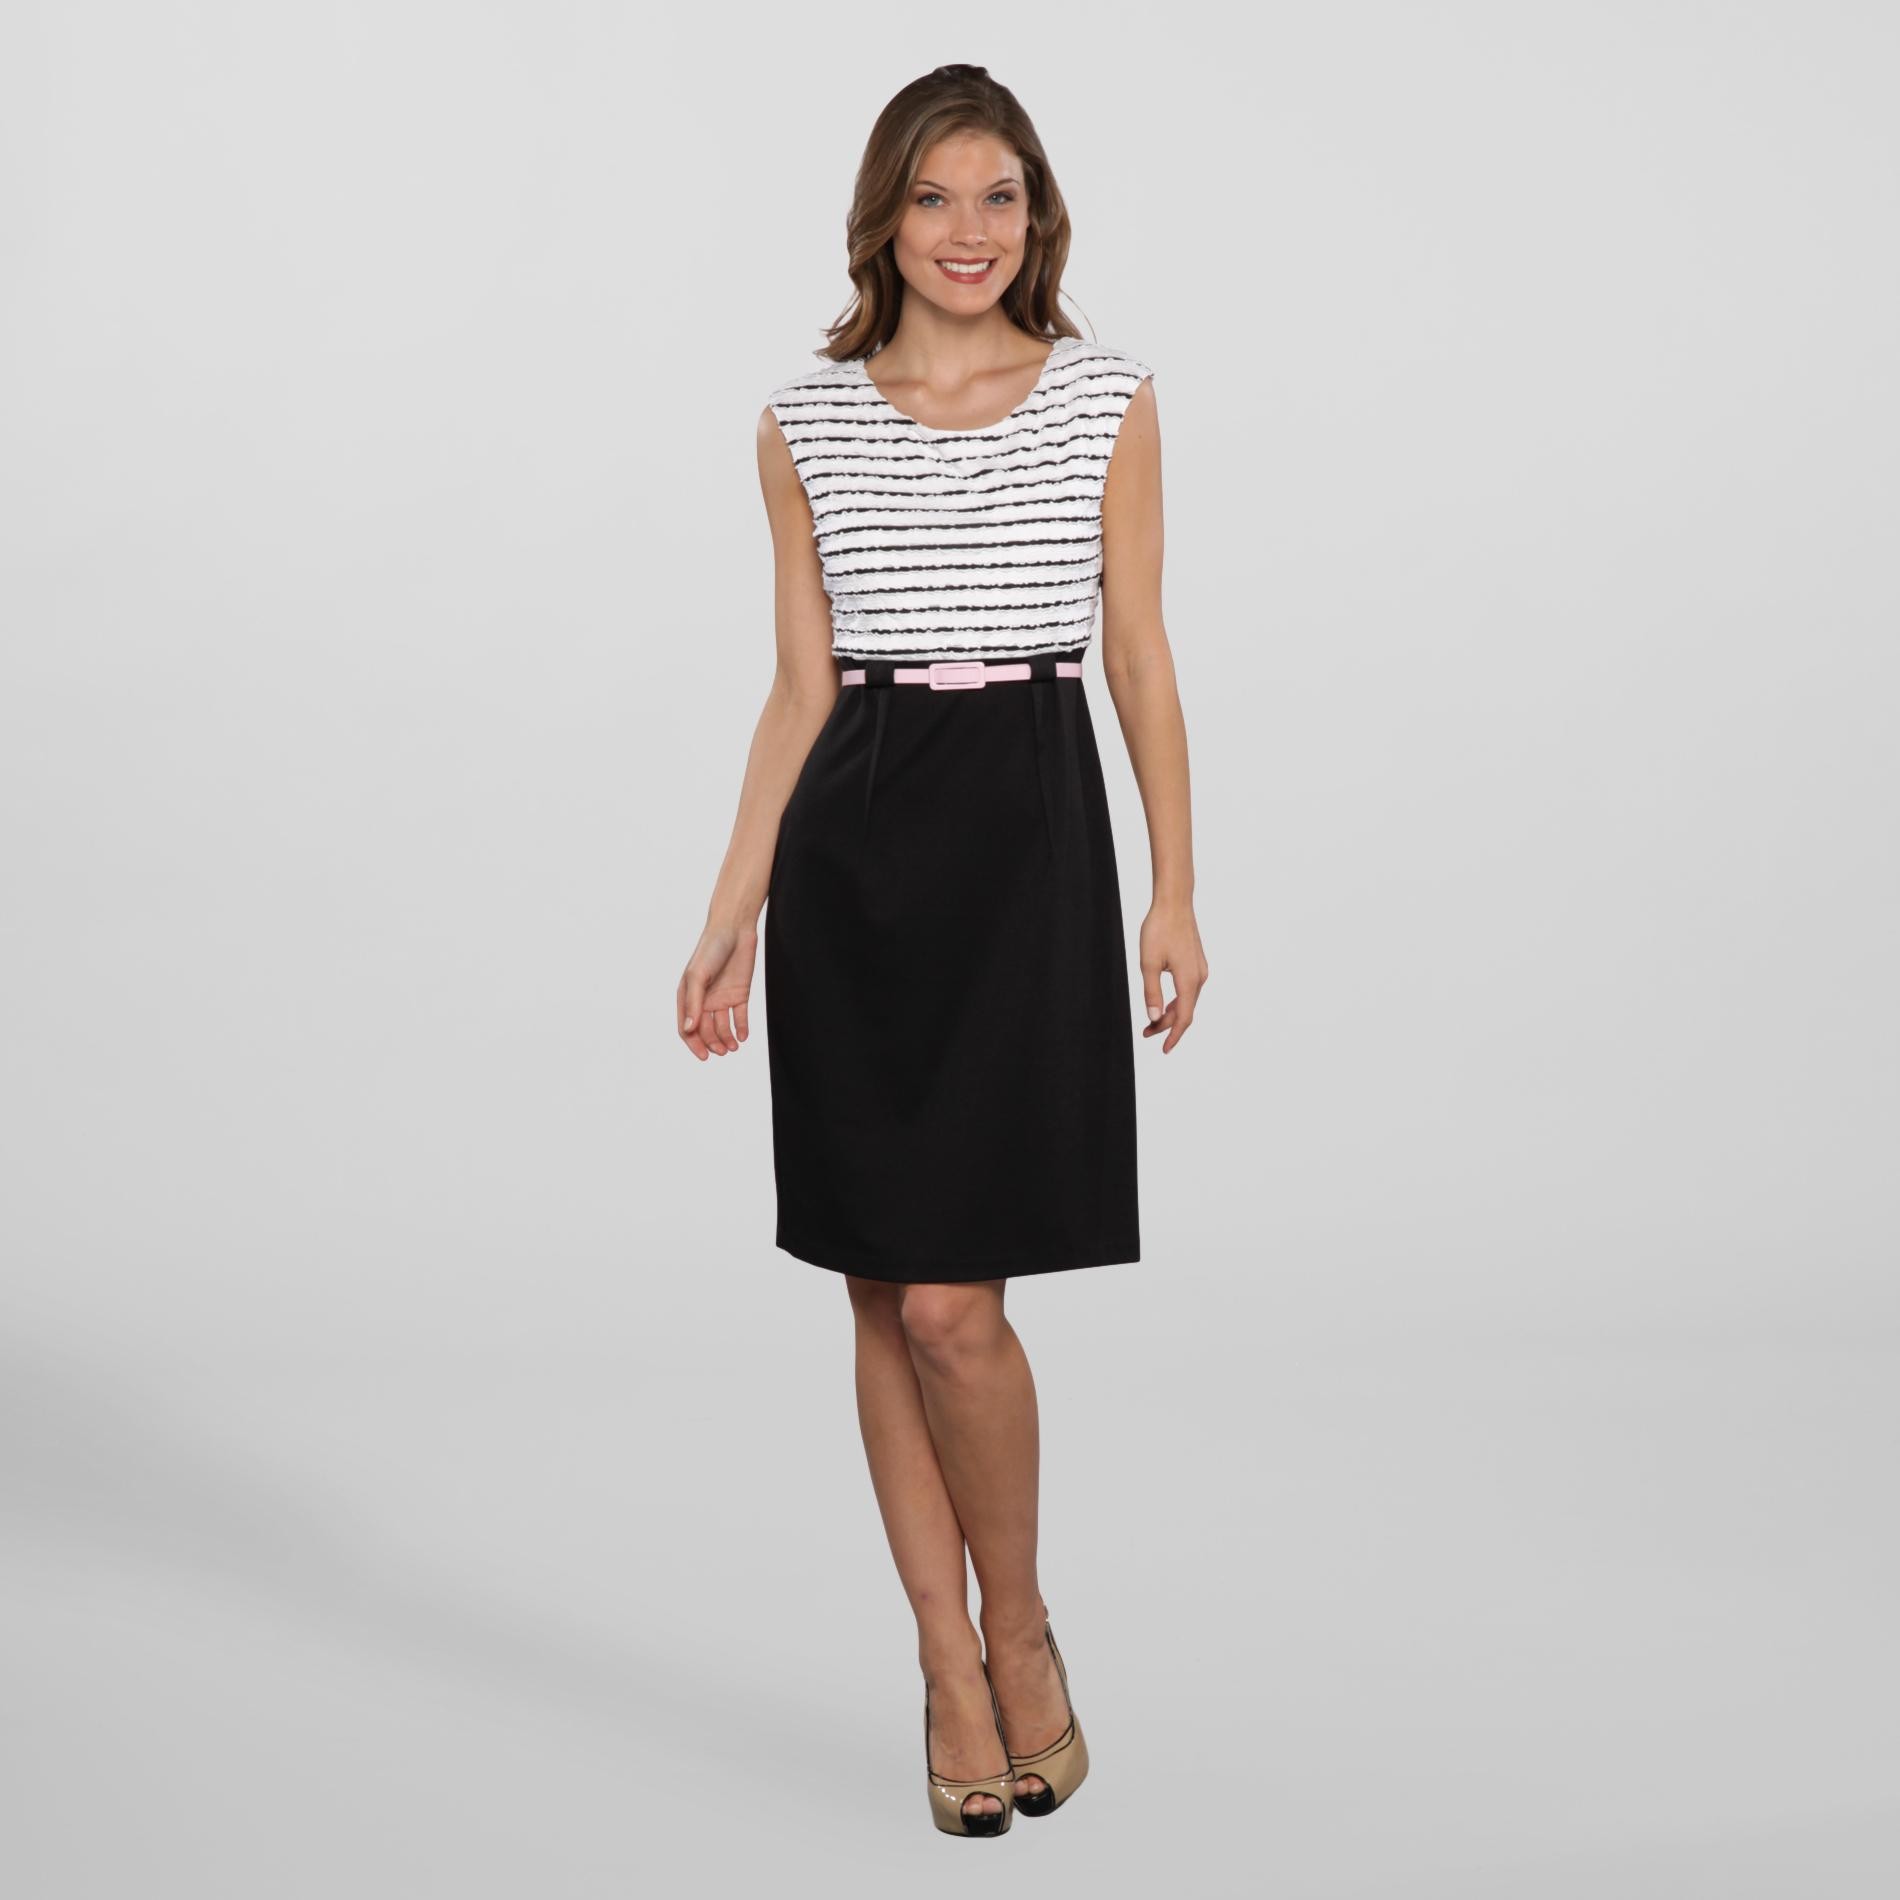 Connected Apparel Women's Party Dress & Belt White/Black/Pink 14